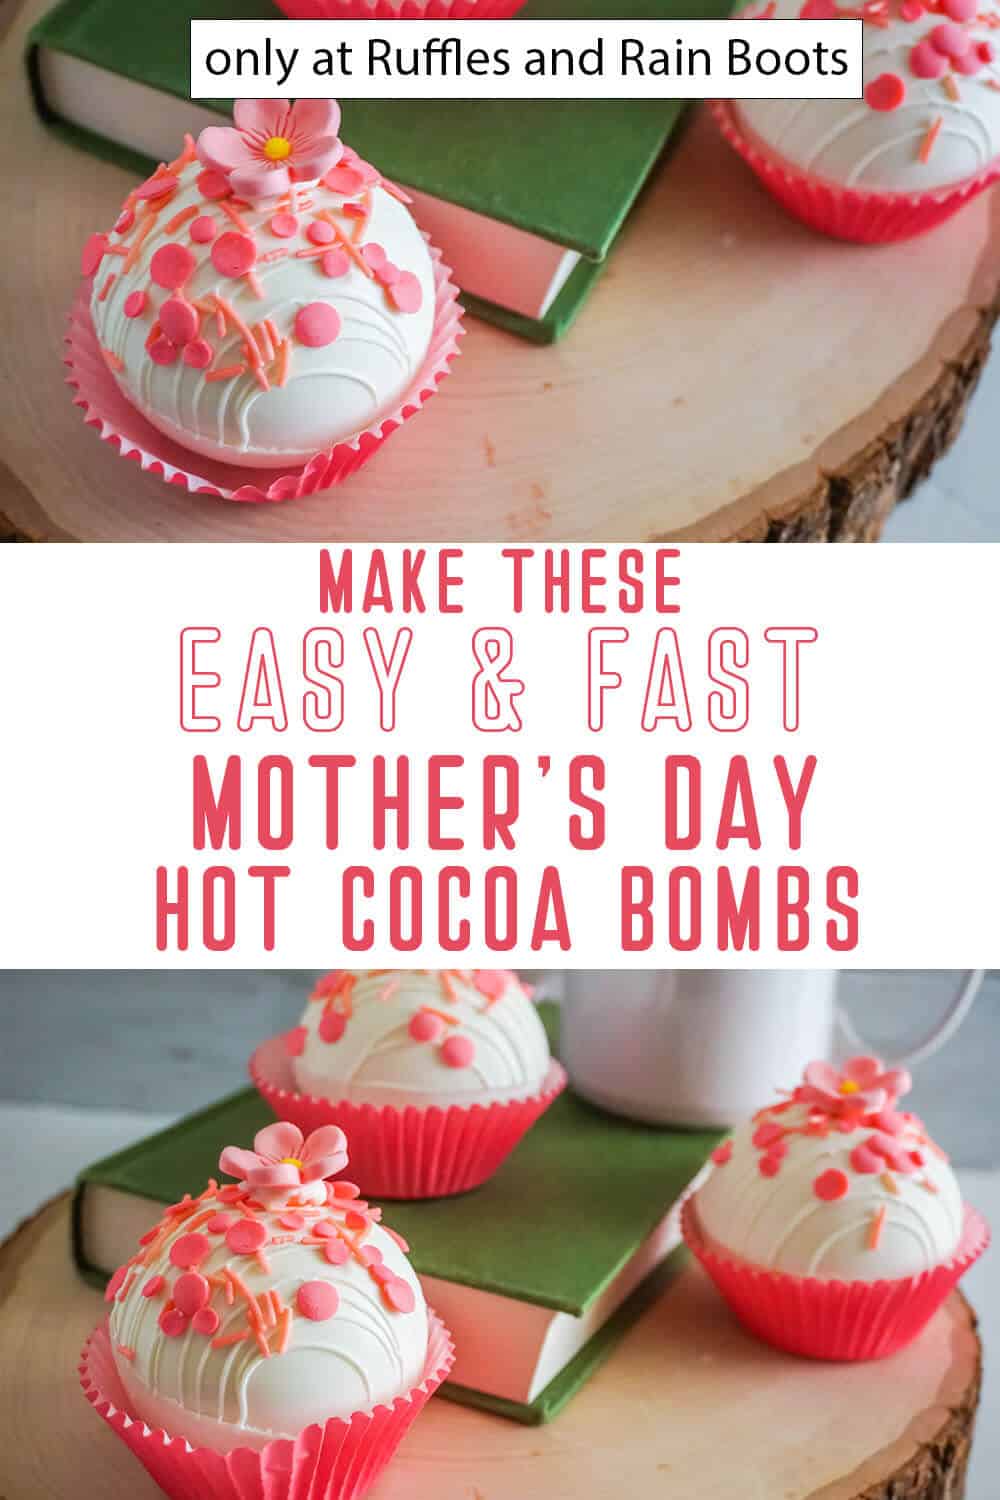 photo collage of mother's day hot cocoa bombs recipe with text which reads make these easy & fast mother's day hot cocoa bombs